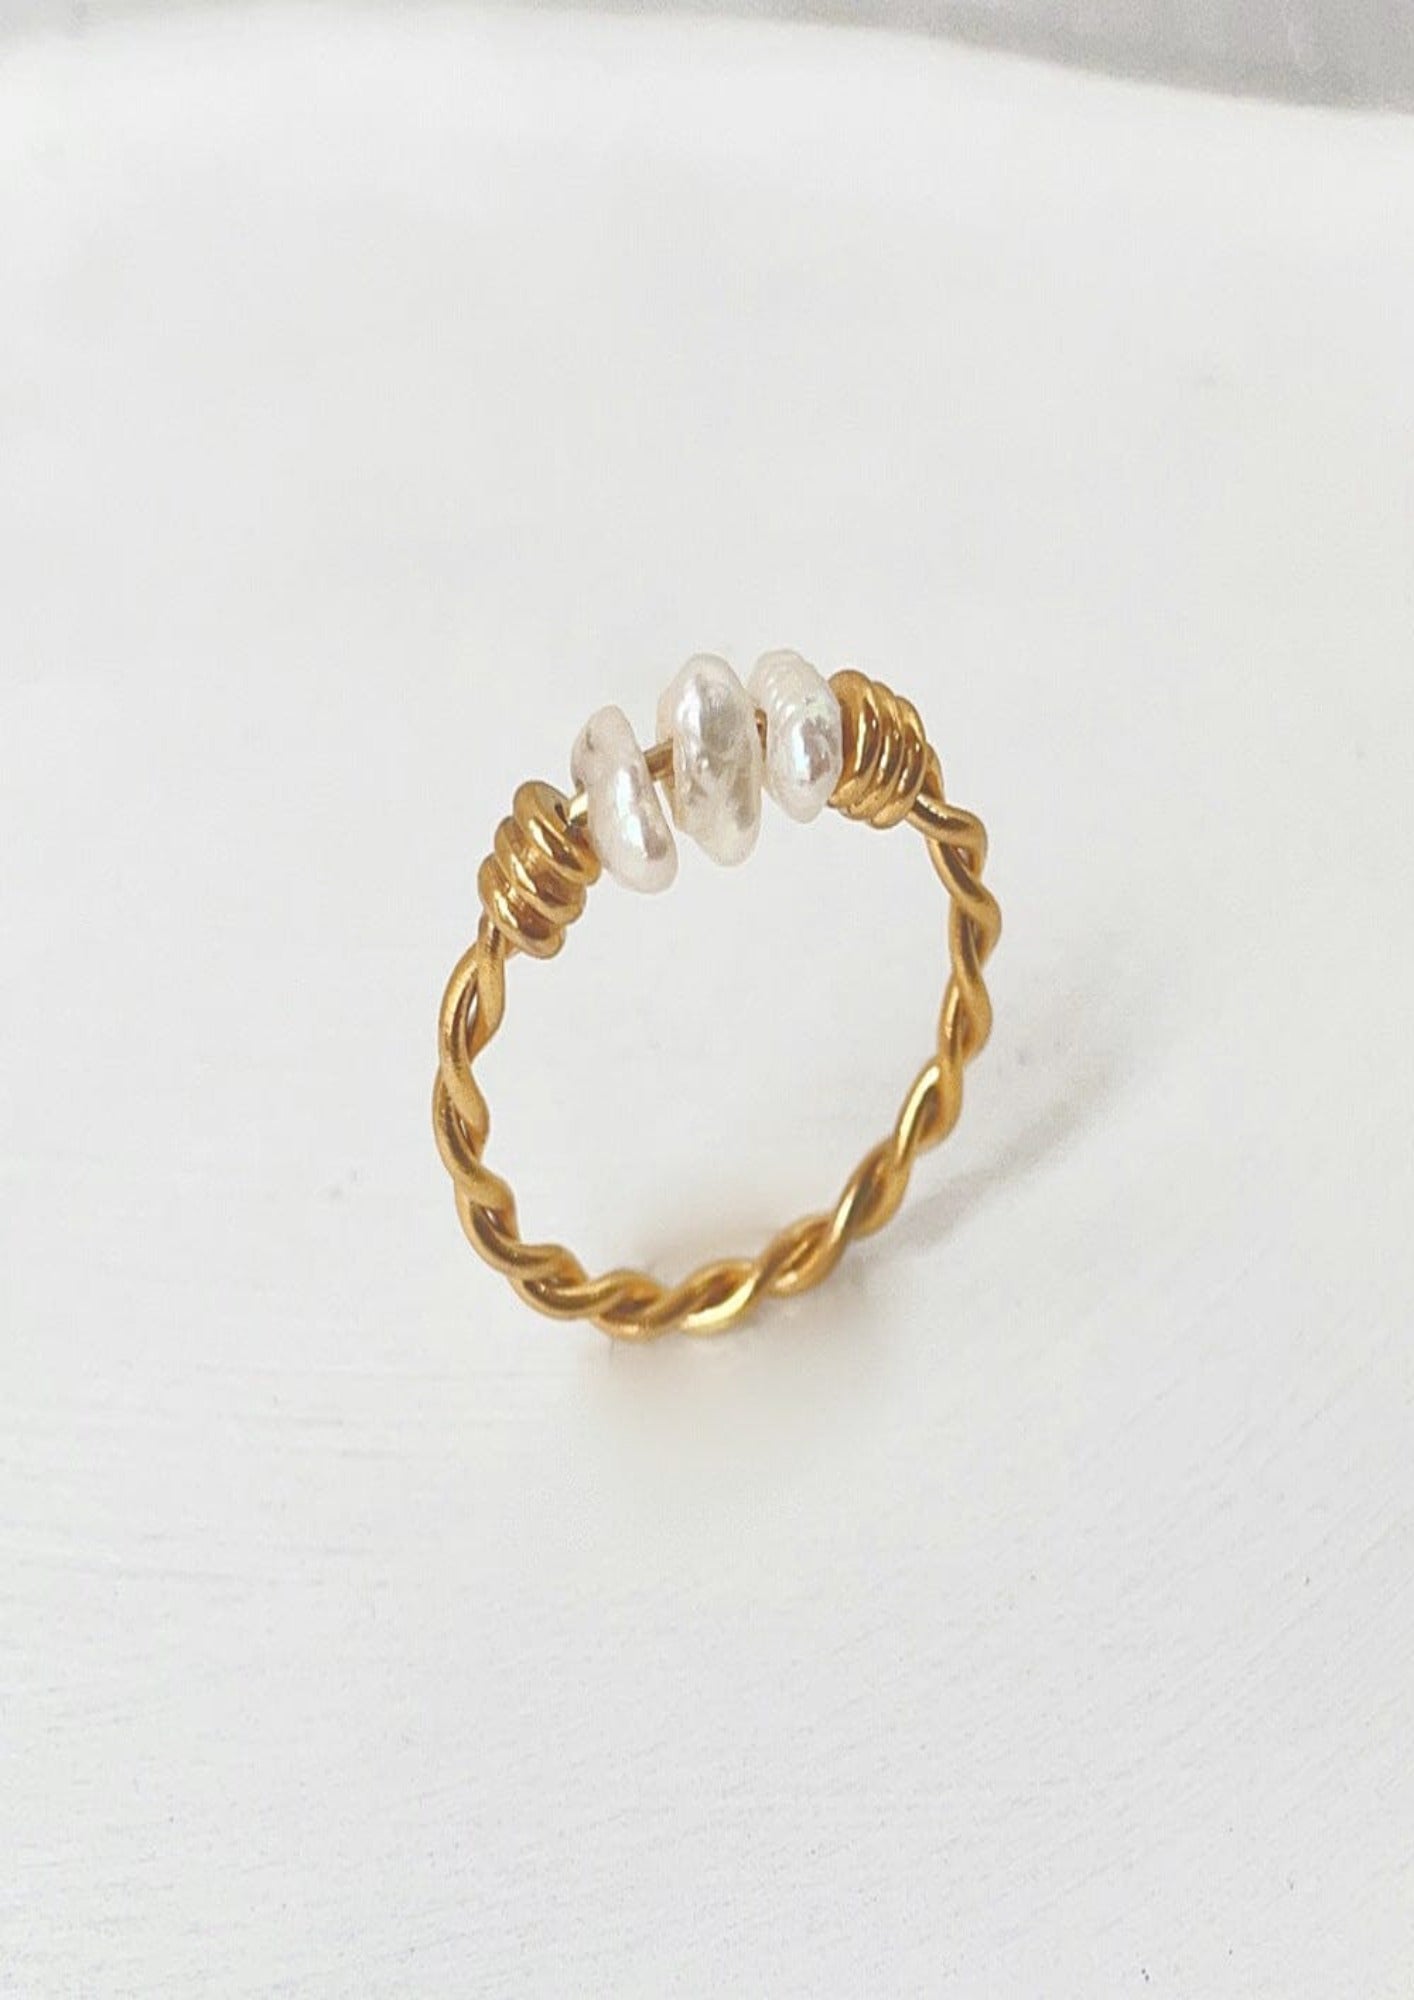 TWIST RING ring Yubama Jewelry Online Store - The Elegant Designs of Gold and Silver ! 